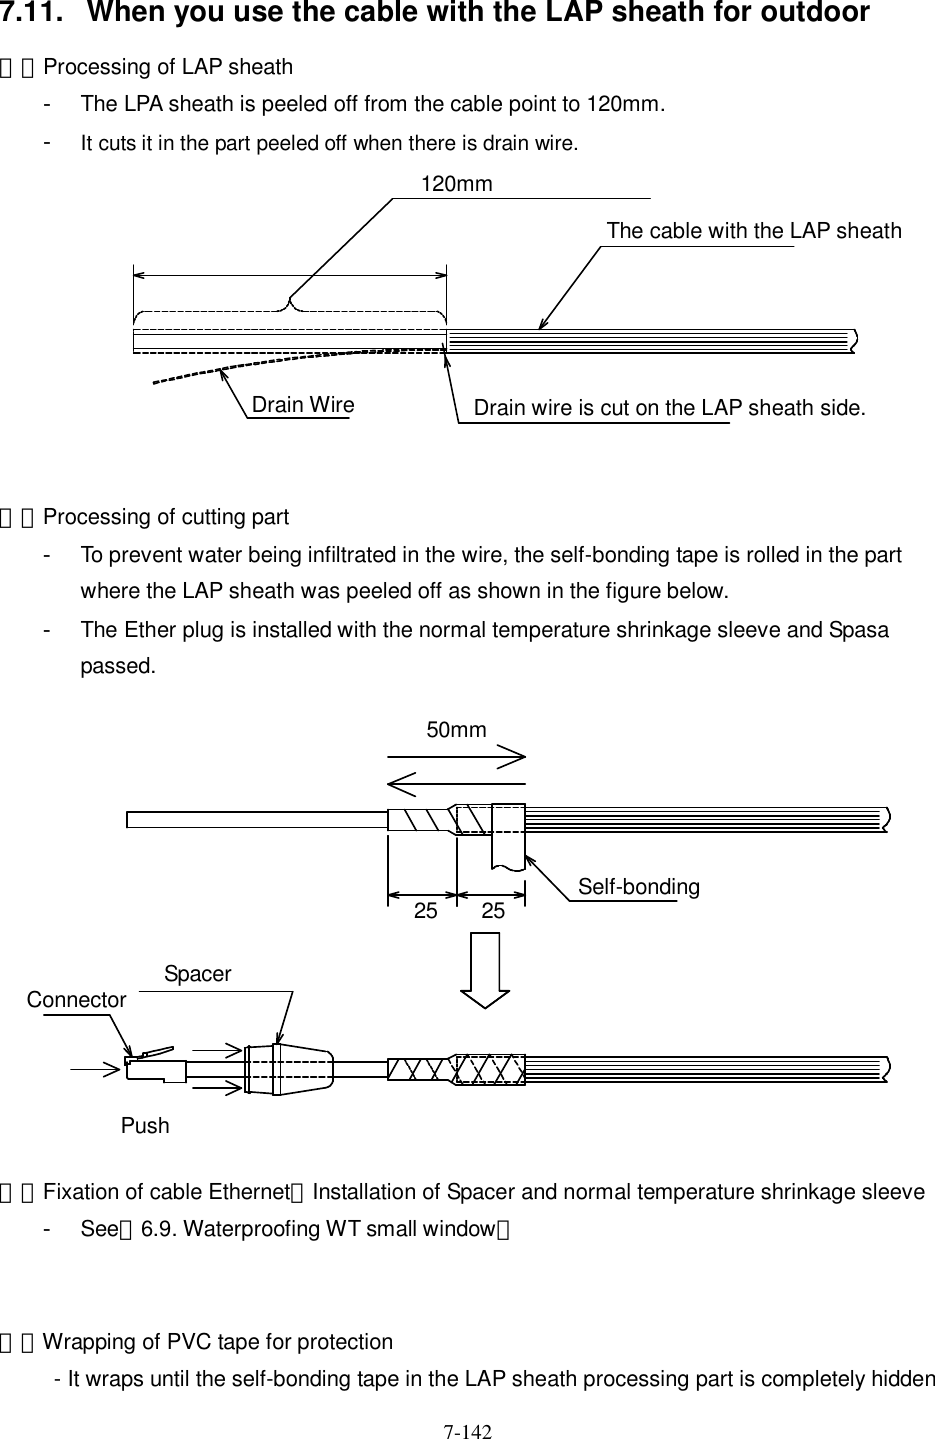   7-142   7.11.  When you use the cable with the LAP sheath for outdoor １．Processing of LAP sheath -  The LPA sheath is peeled off from the cable point to 120mm. -  It cuts it in the part peeled off when there is drain wire.          ２．Processing of cutting part -  To prevent water being infiltrated in the wire, the self-bonding tape is rolled in the part where the LAP sheath was peeled off as shown in the figure below. -  The Ether plug is installed with the normal temperature shrinkage sleeve and Spasa passed.              ３．Fixation of cable Ethernet、Installation of Spacer and normal temperature shrinkage sleeve -  See「6.9. Waterproofing WT small window」   ４．Wrapping of PVC tape for protection   - It wraps until the self-bonding tape in the LAP sheath processing part is completely hidden 120mm The cable with the LAP sheath Drain wire is cut on the LAP sheath side. Drain Wire 50mm 25 25 Self-bonding Spacer Connector Push 